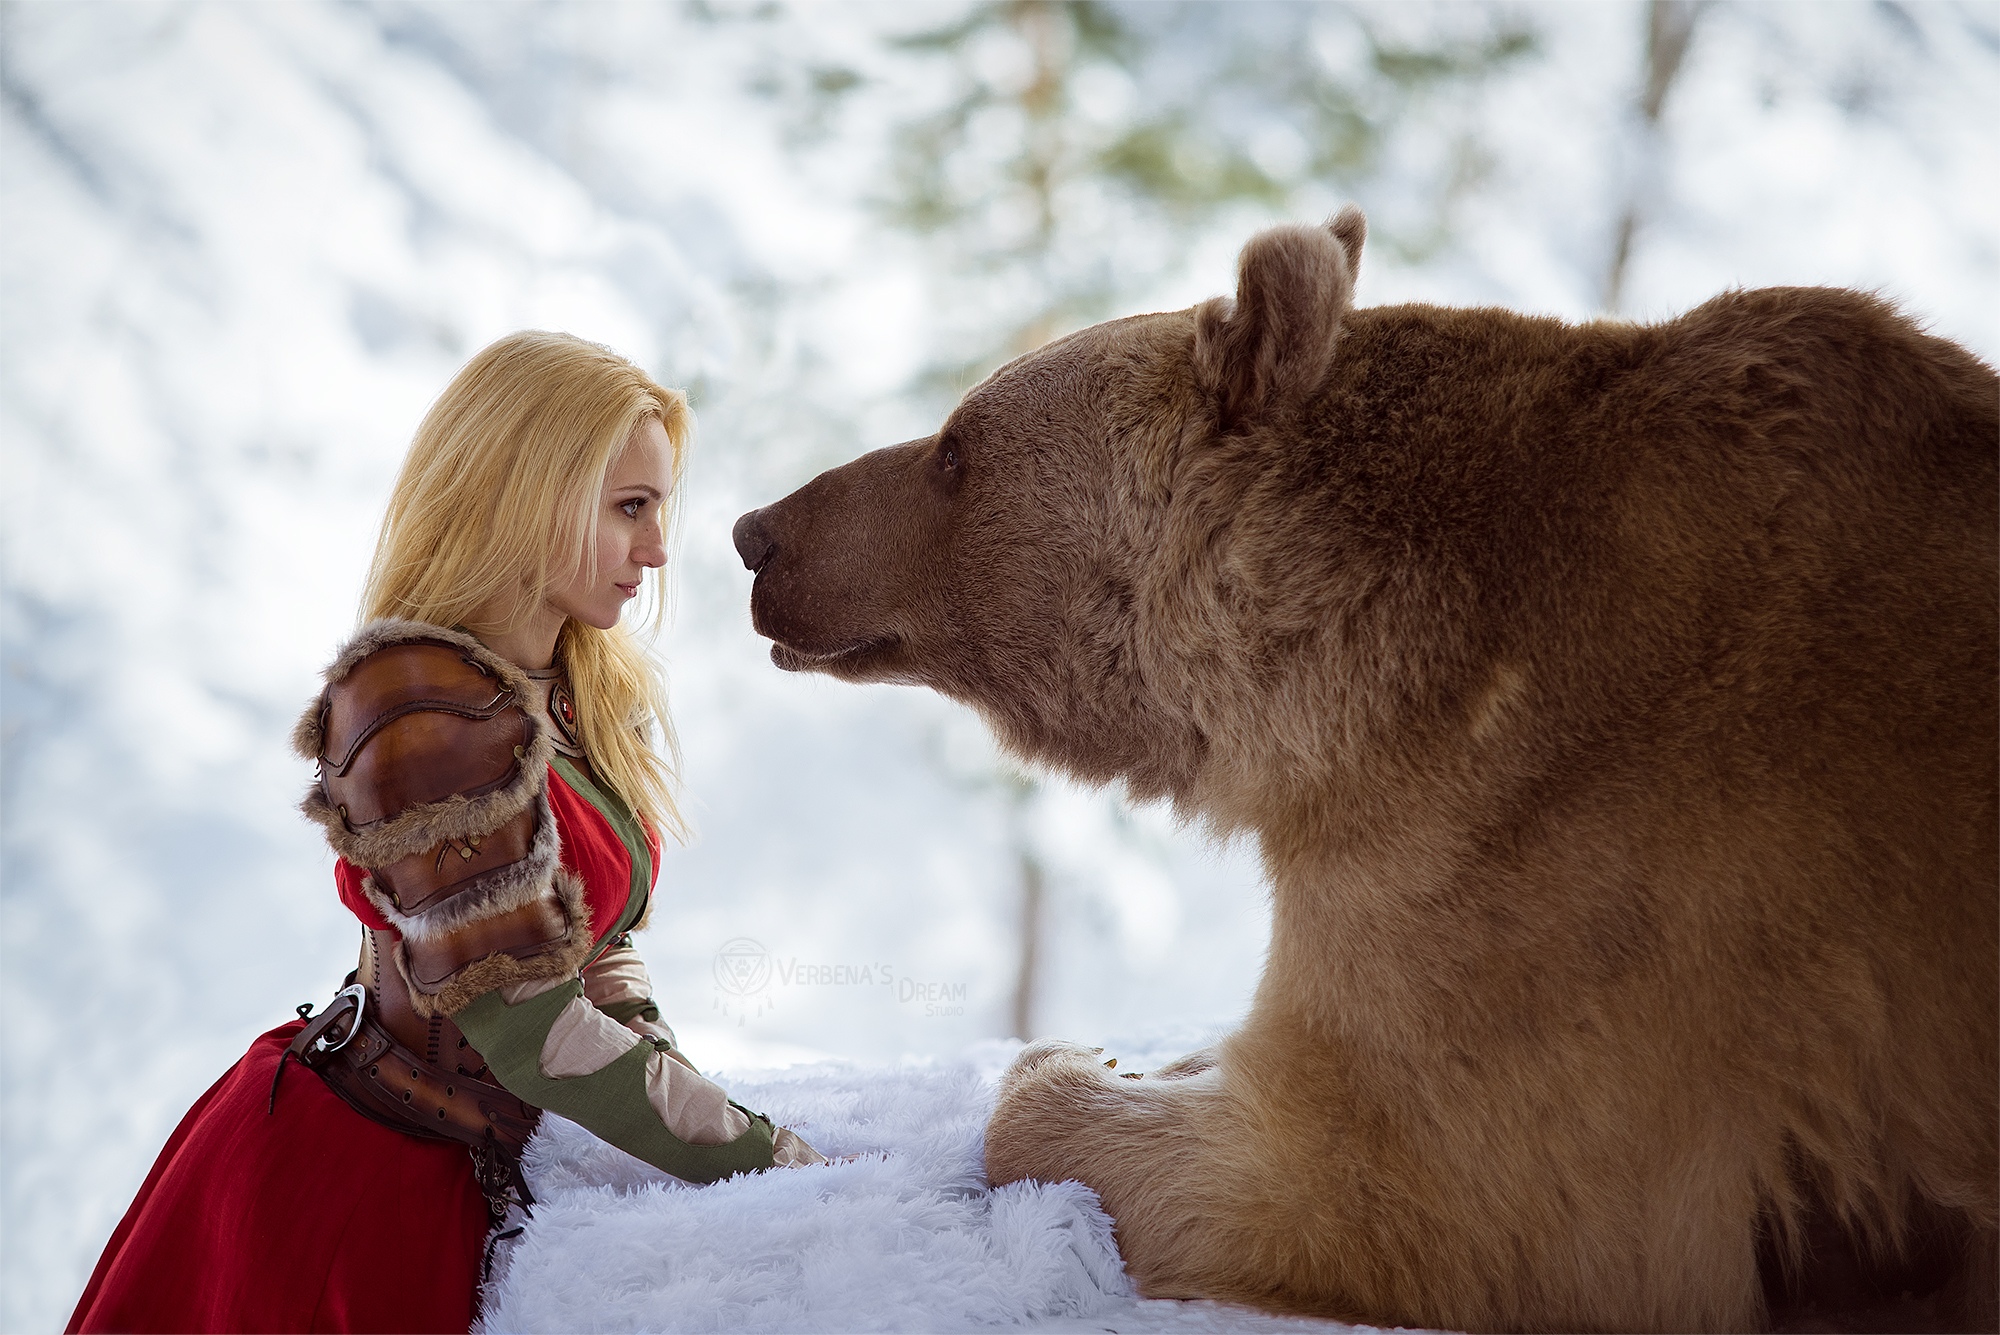 Darya Lefler Women Model Blonde Cosplay Shoulder Pads Dress Red Dress Face To Face Bears Animals Out 2000x1335